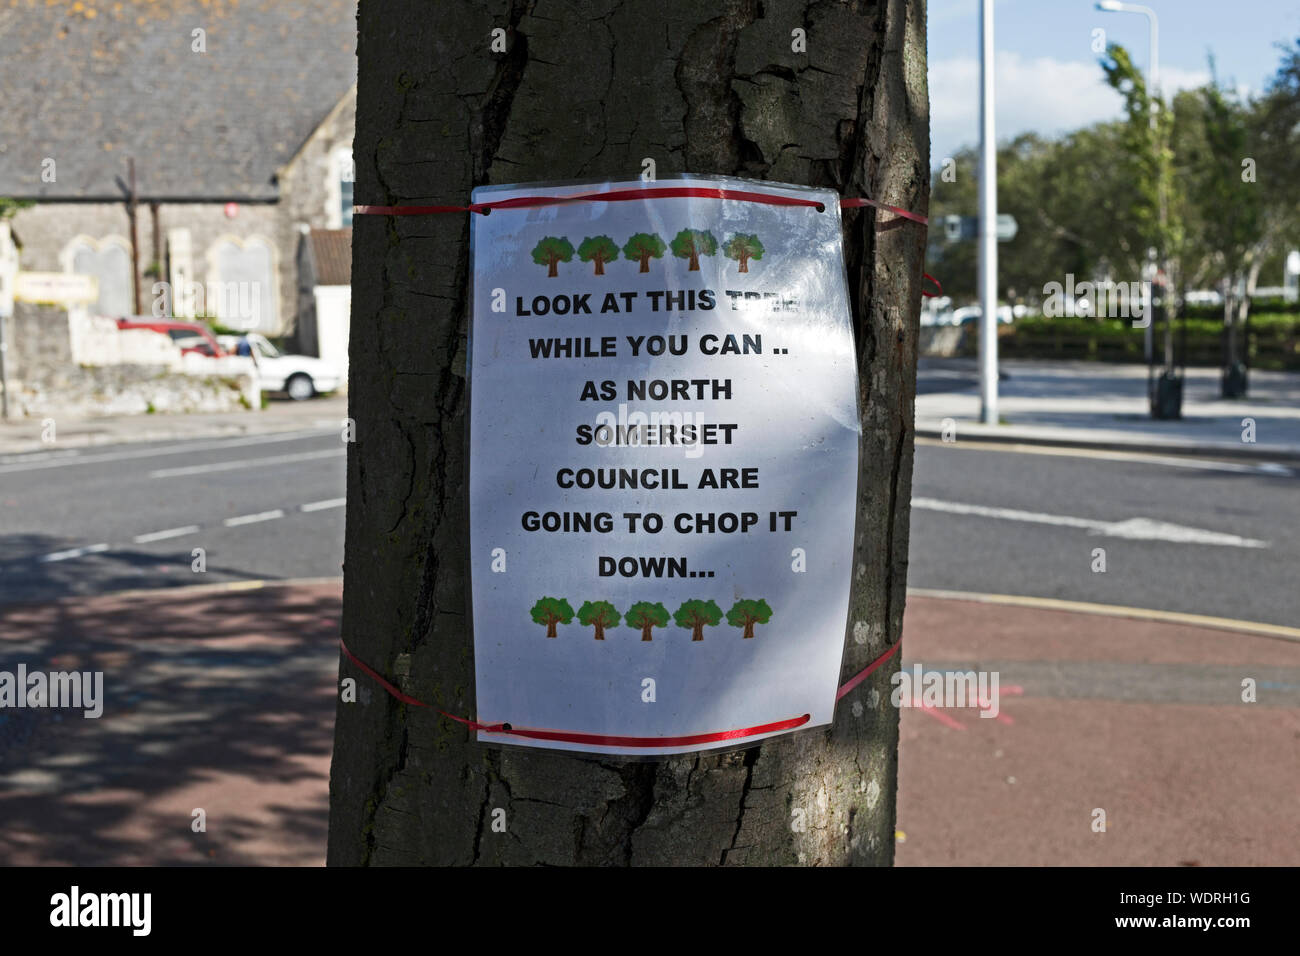 A sign on a tree in Weston-super-Mare, UK which is is danger of being cut down as part of the town’s planned transport enhancement scheme. Stock Photo